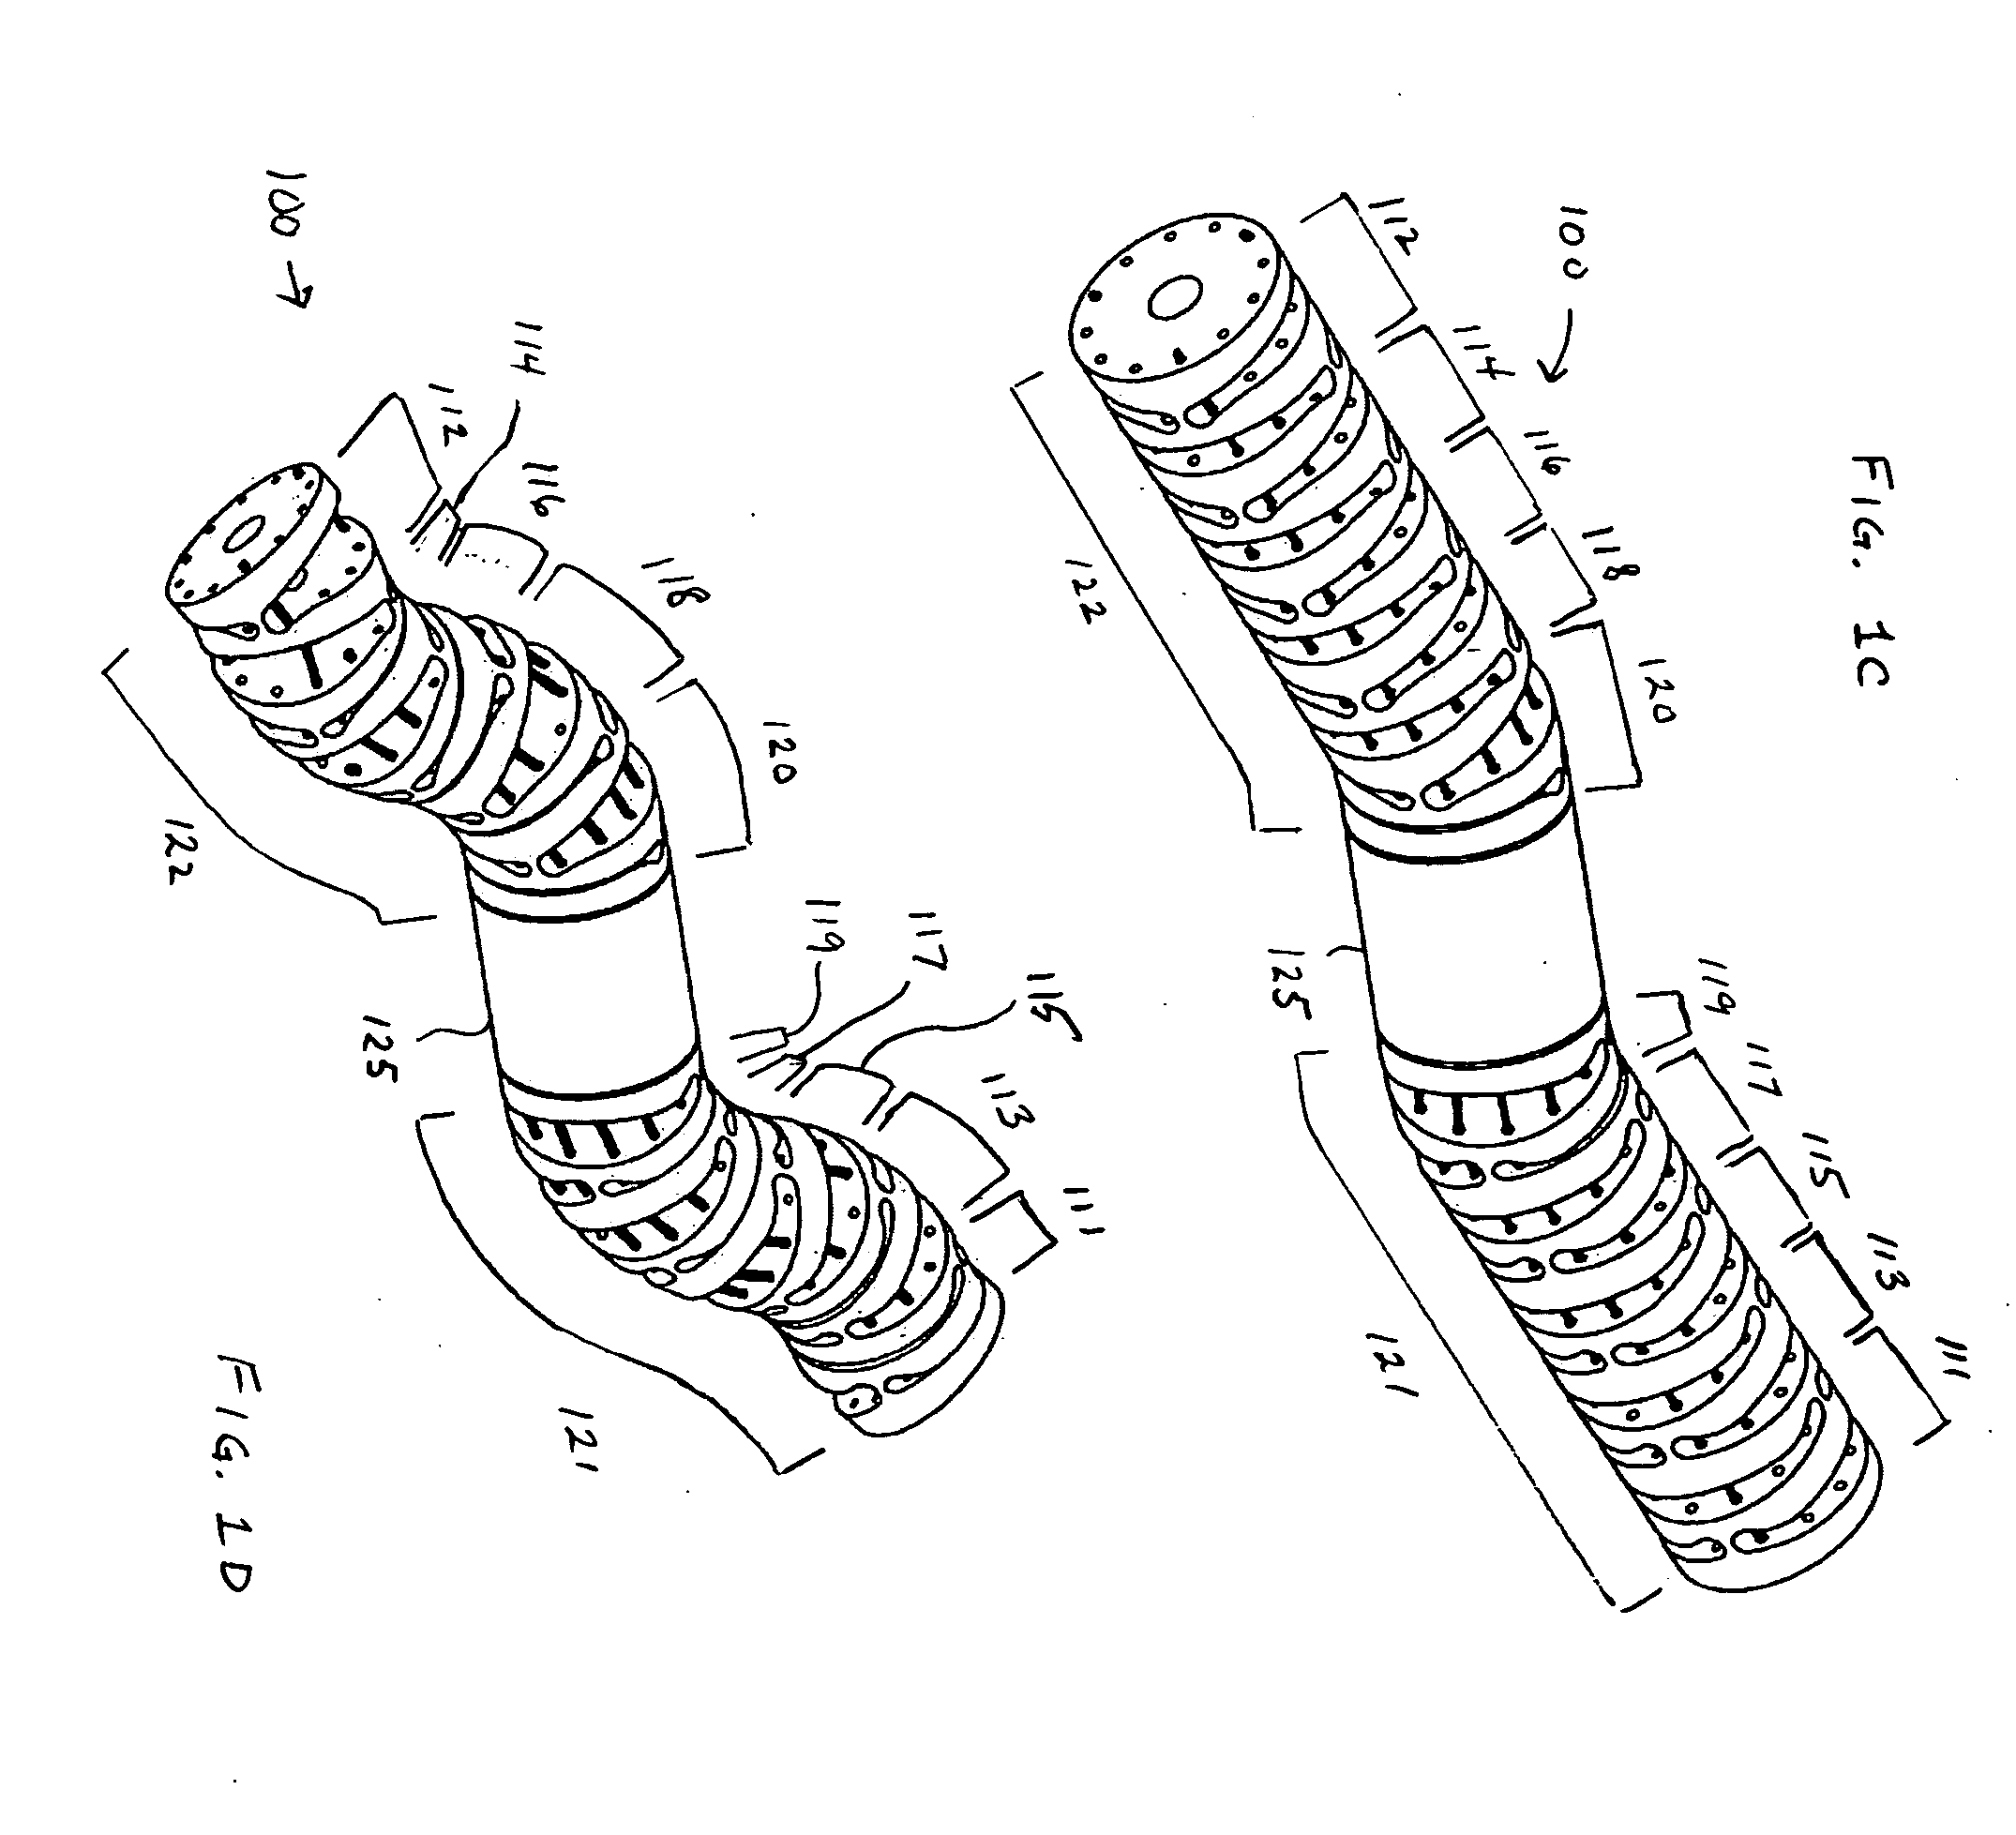 Articulating mechanism with flex-hinged links